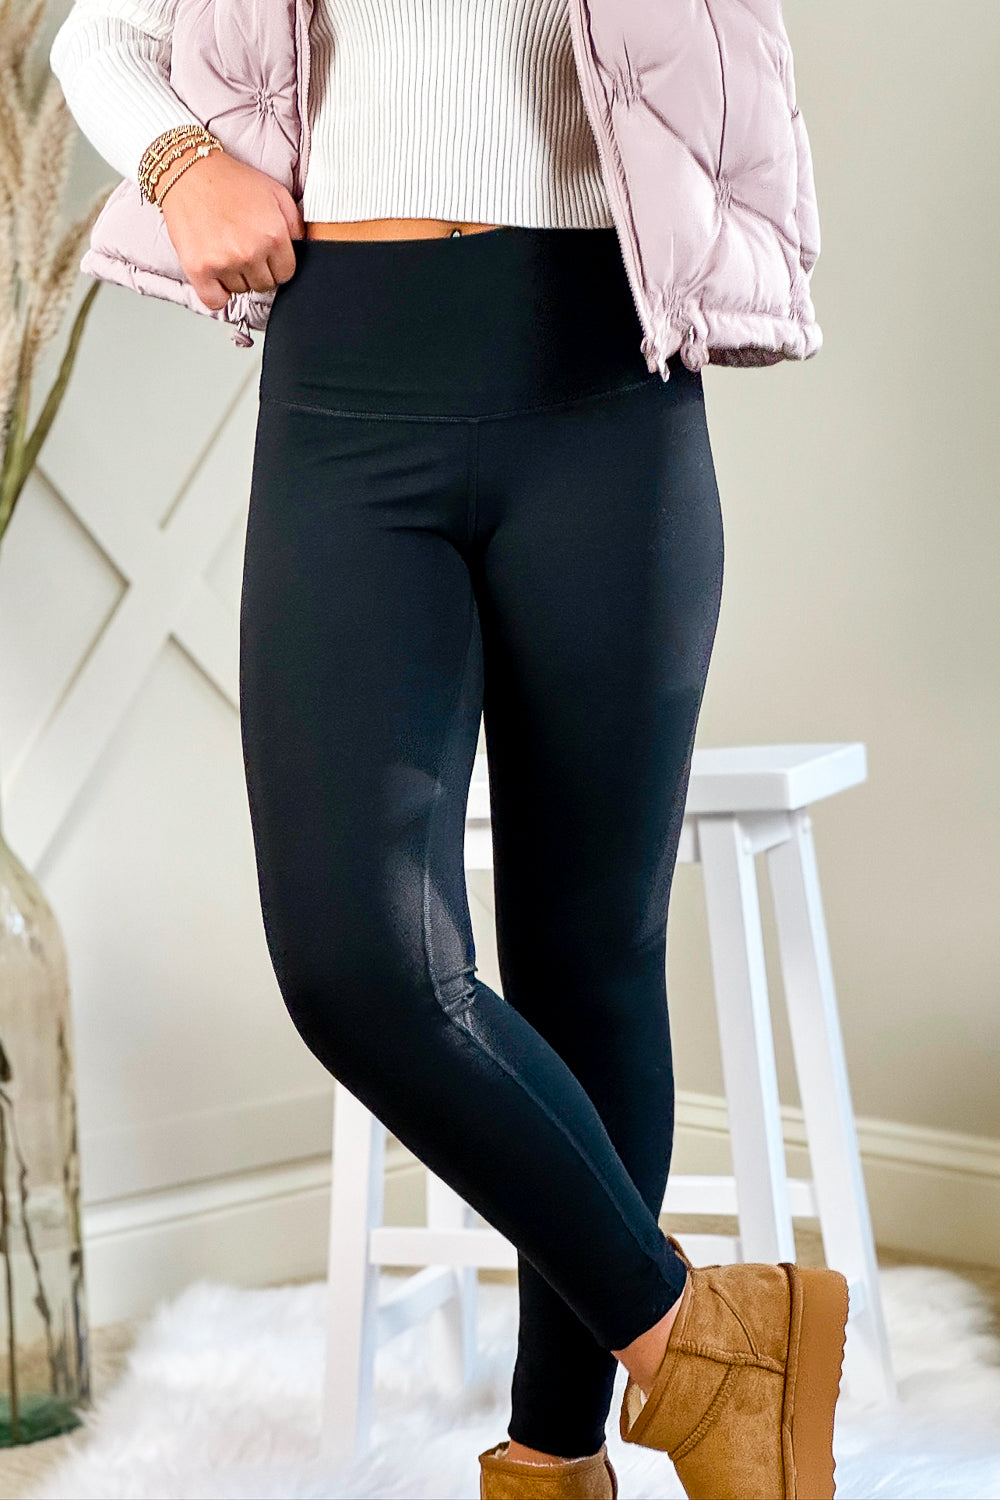 Express Upwest The High Waisted Flare Leggings